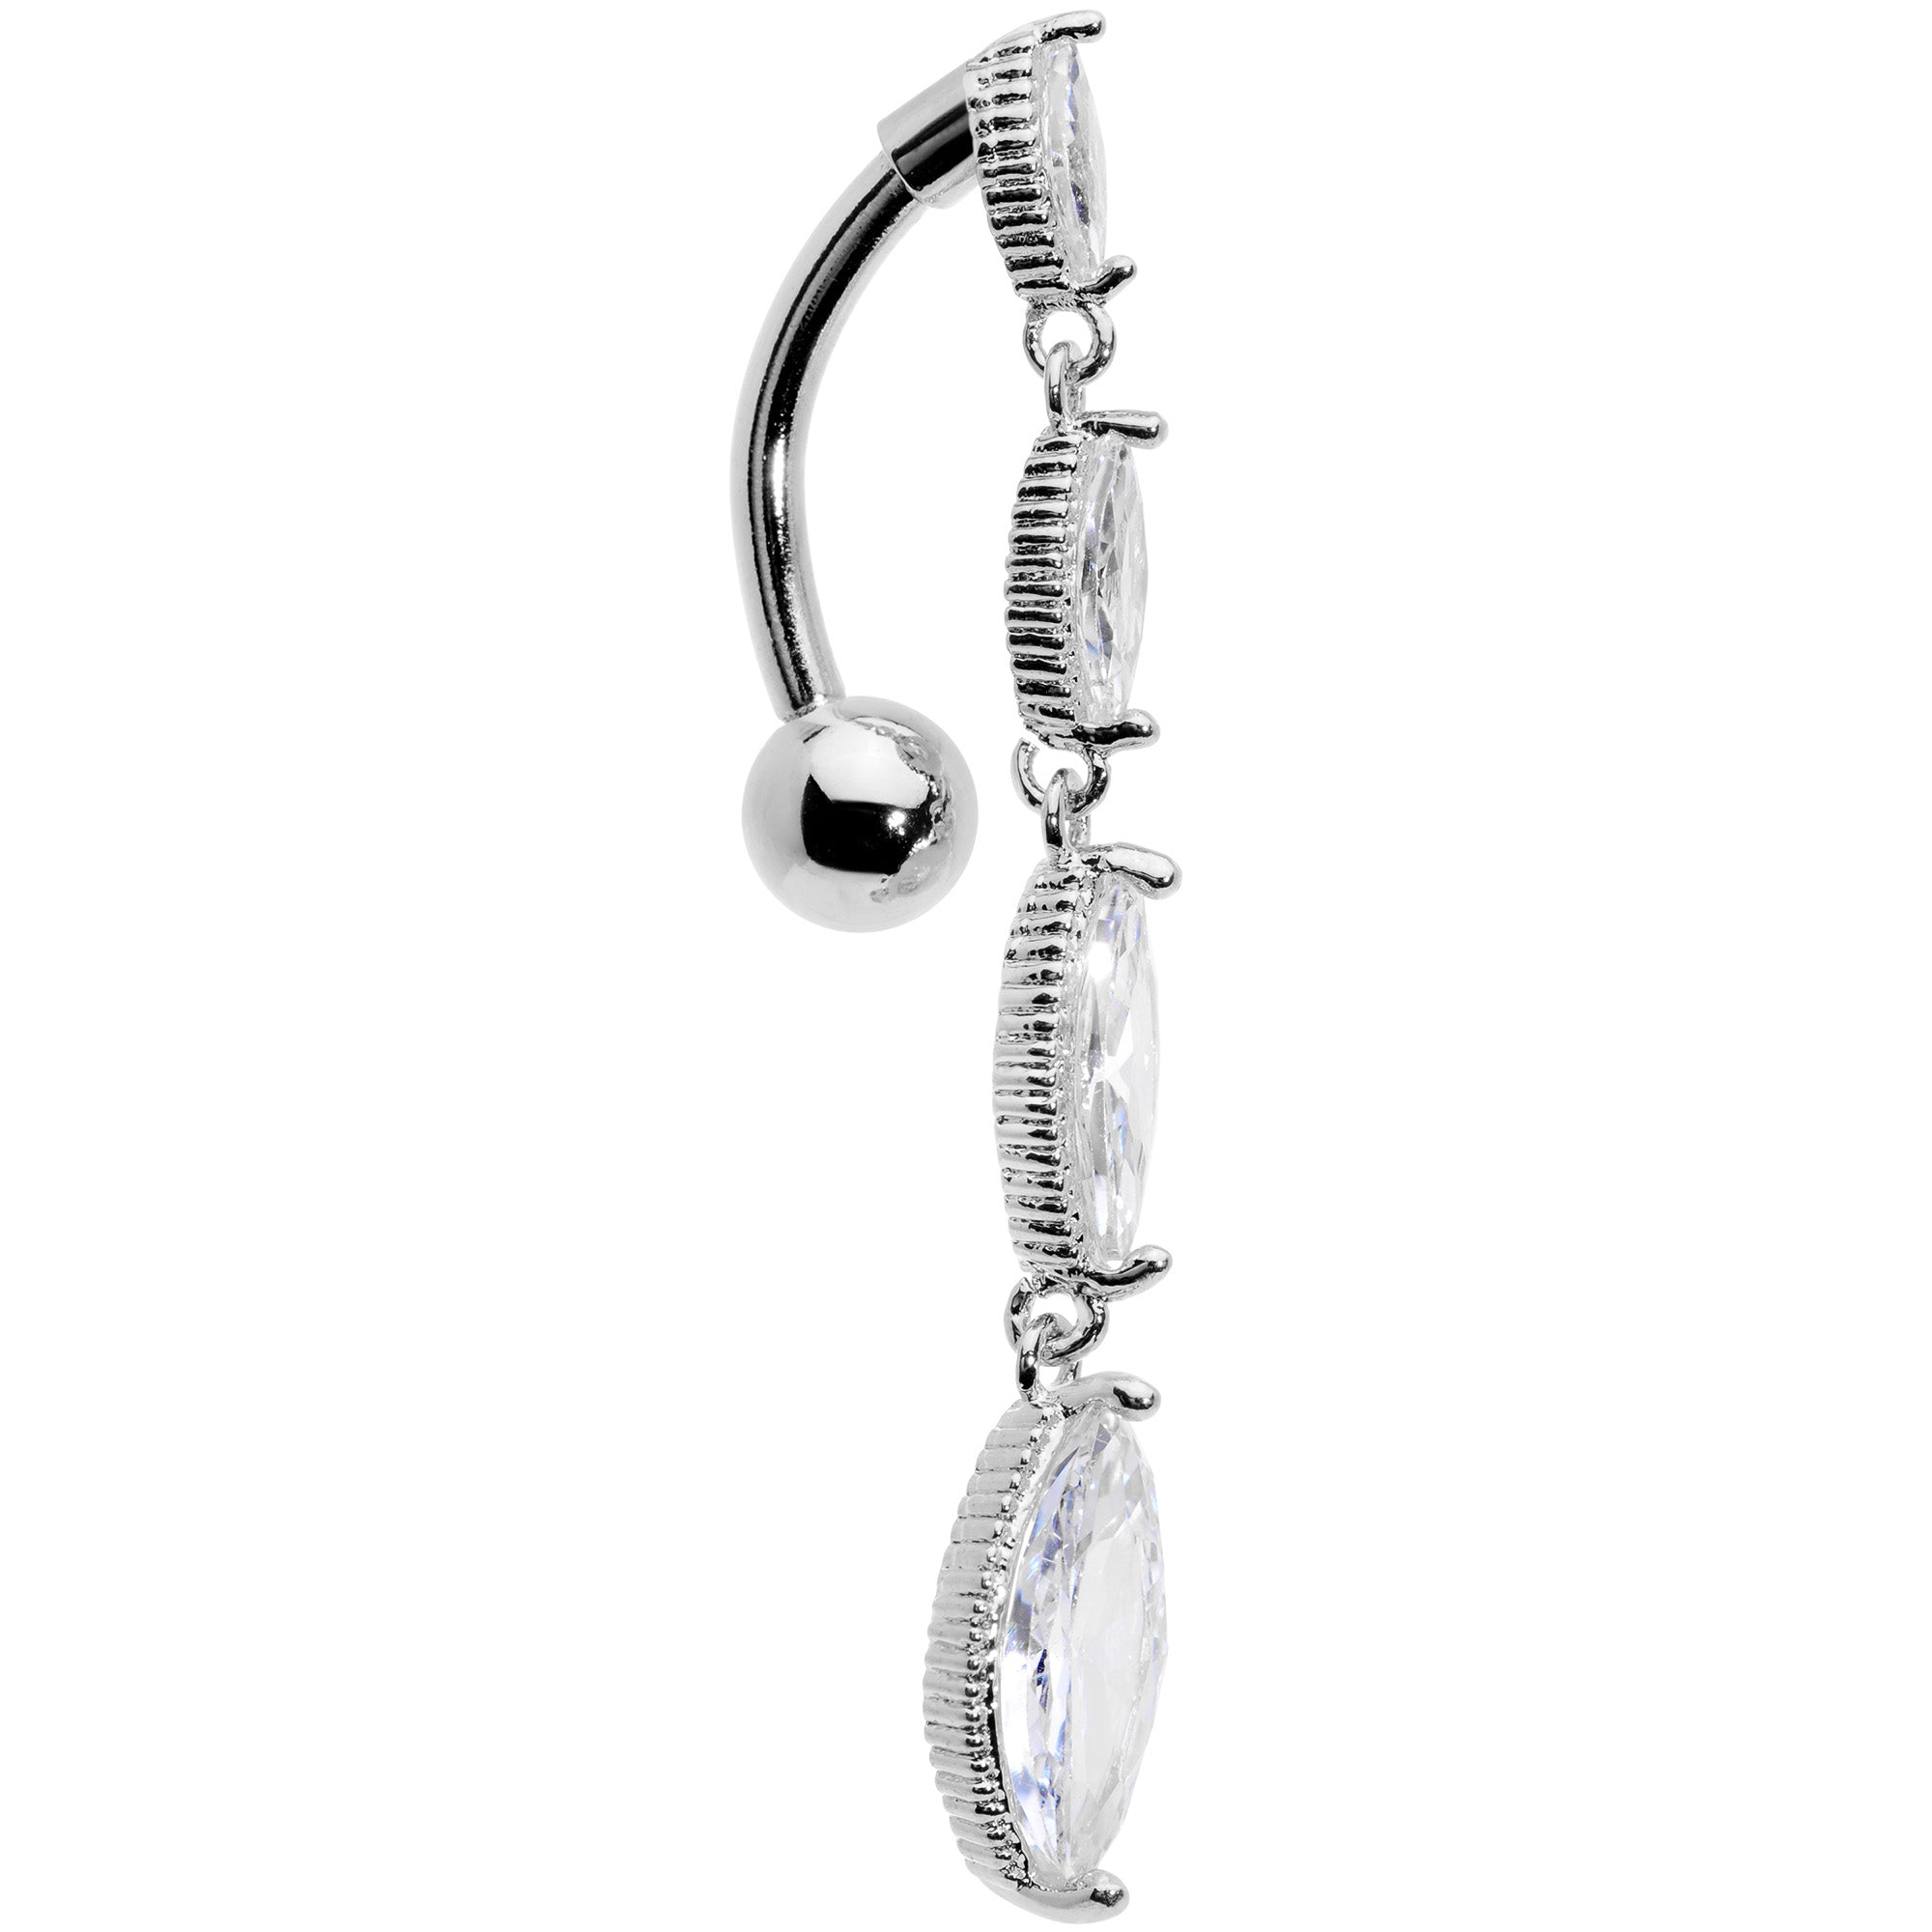 Clear CZ Gem Waterfall Dangle Top Mount Belly Ring